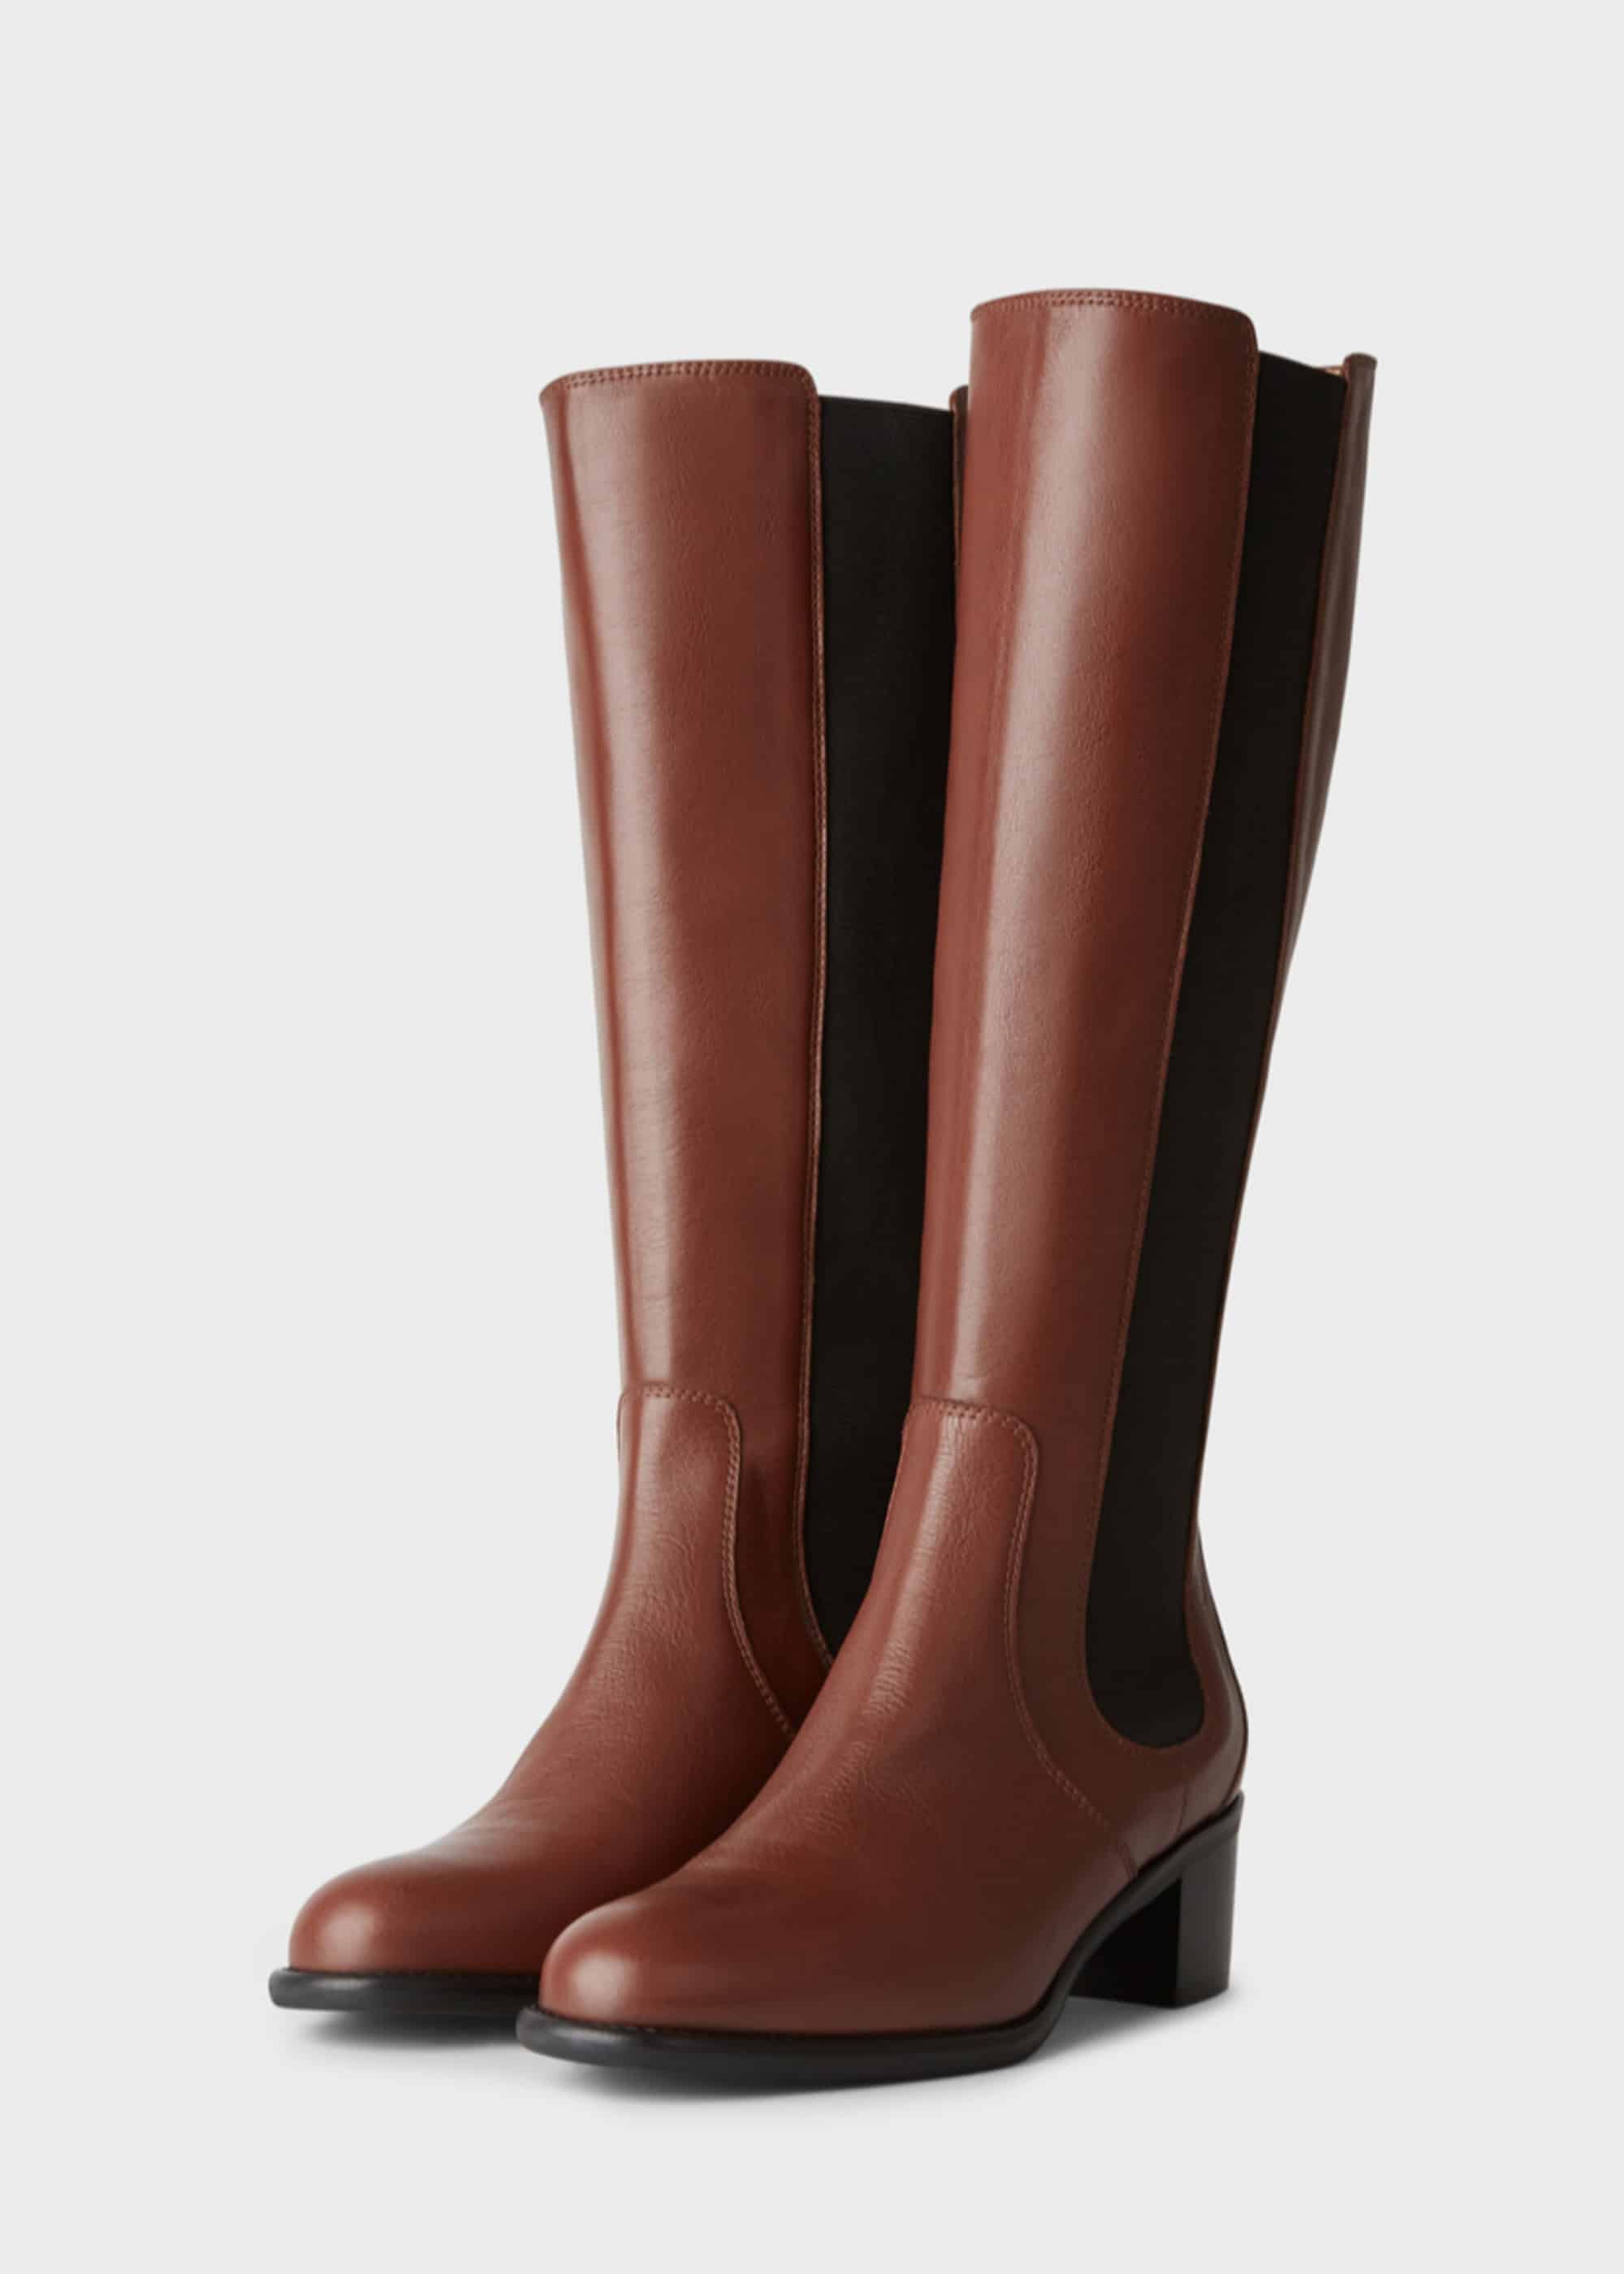 Shop Hobbs Boots on sale at the Marie 